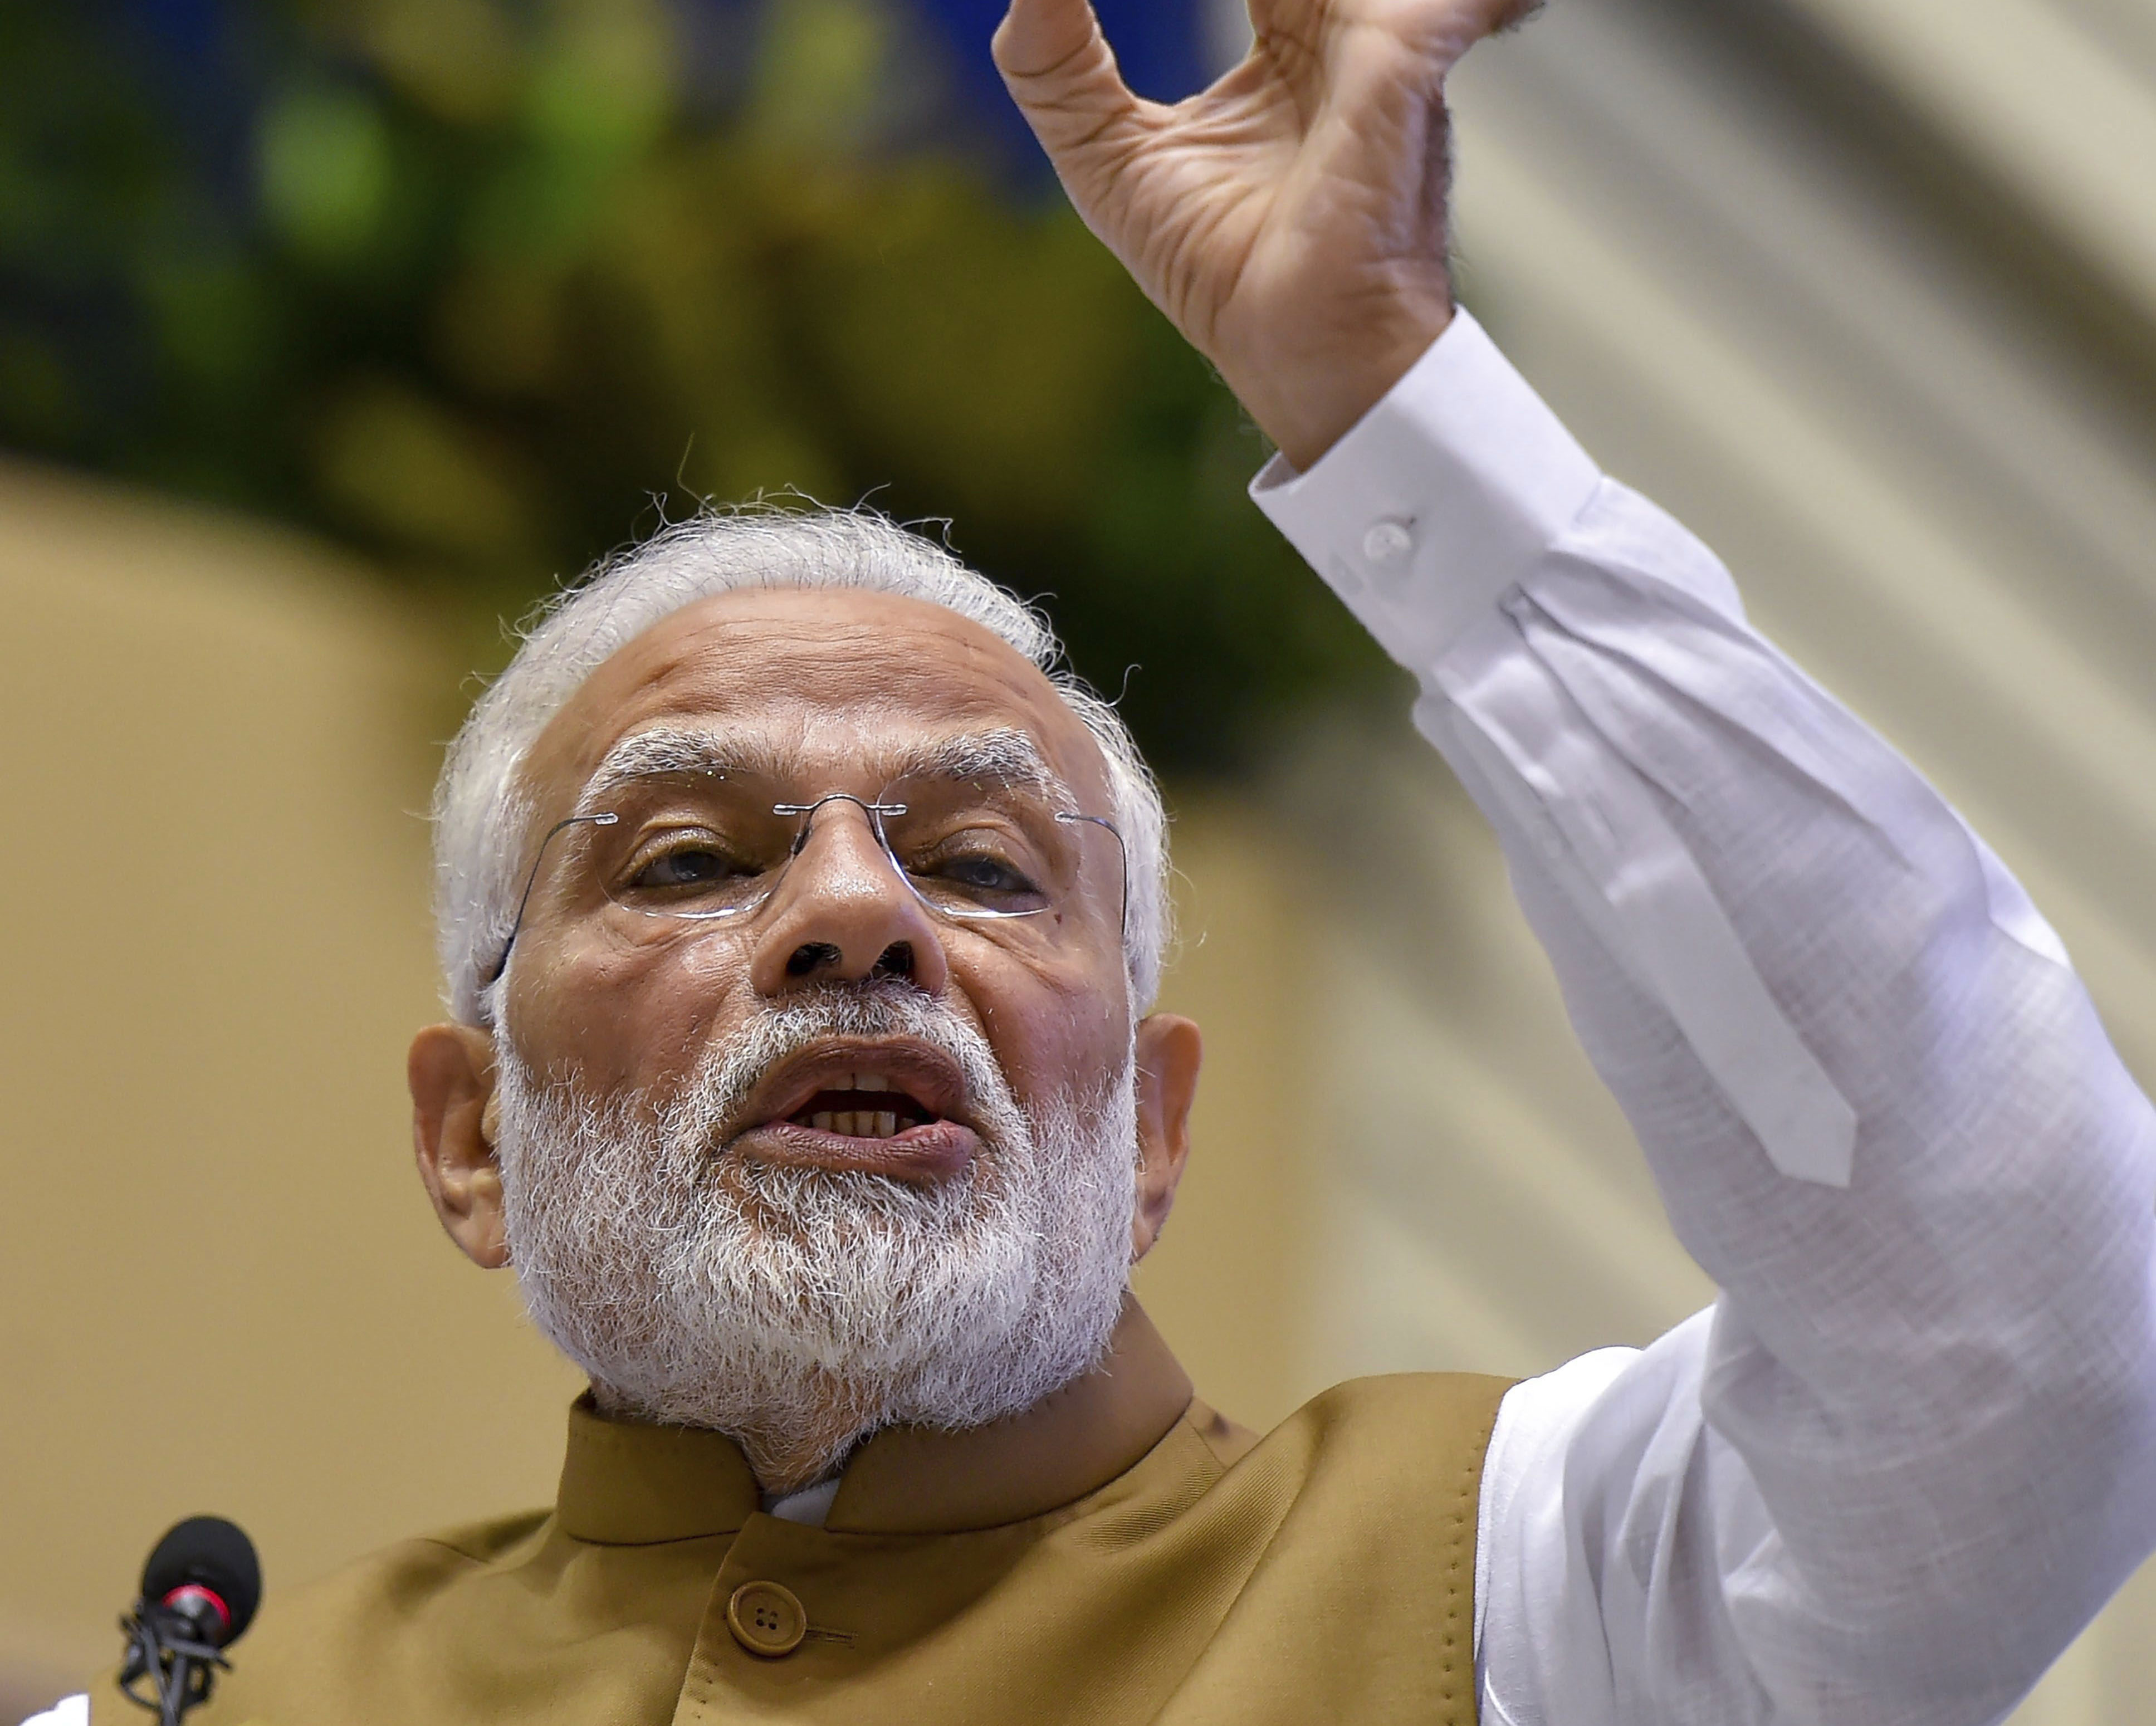 Some oppn leaders are lying machines, fire off lies like AK 47: Modi